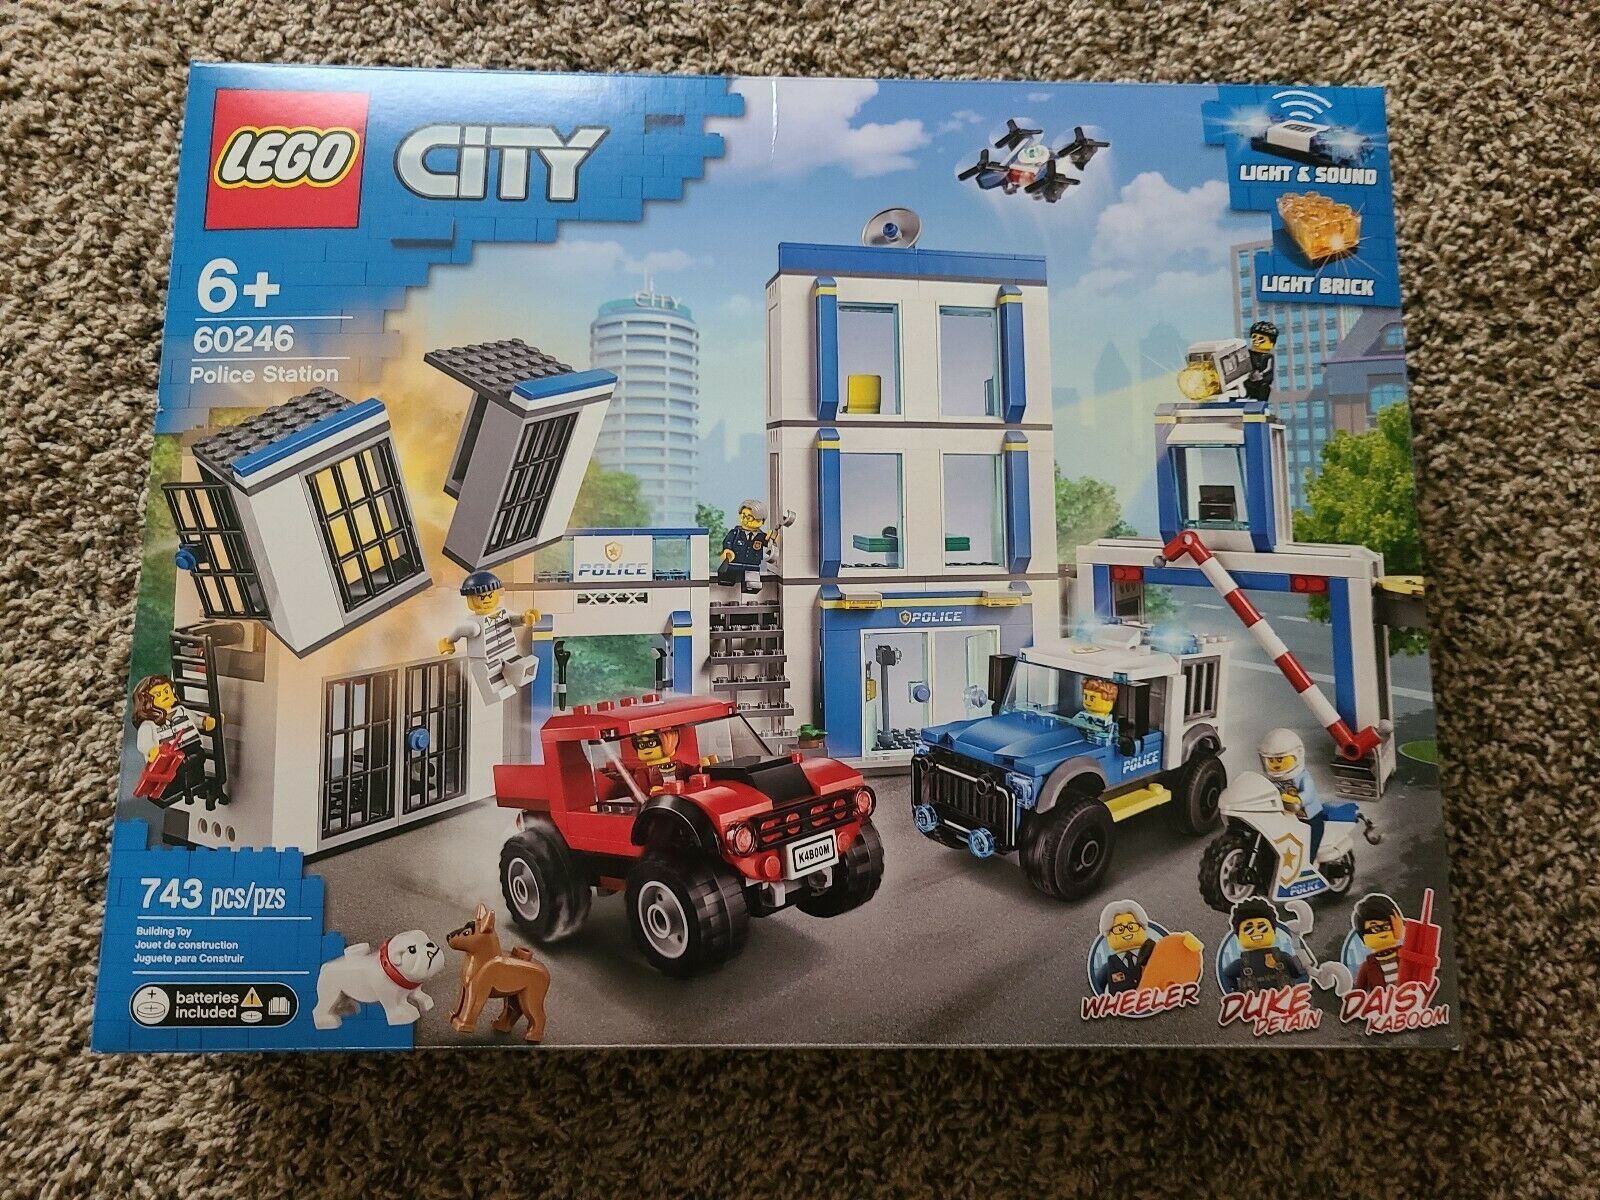 New LEGO 60246 City Police Station Fun Building Set for Kids